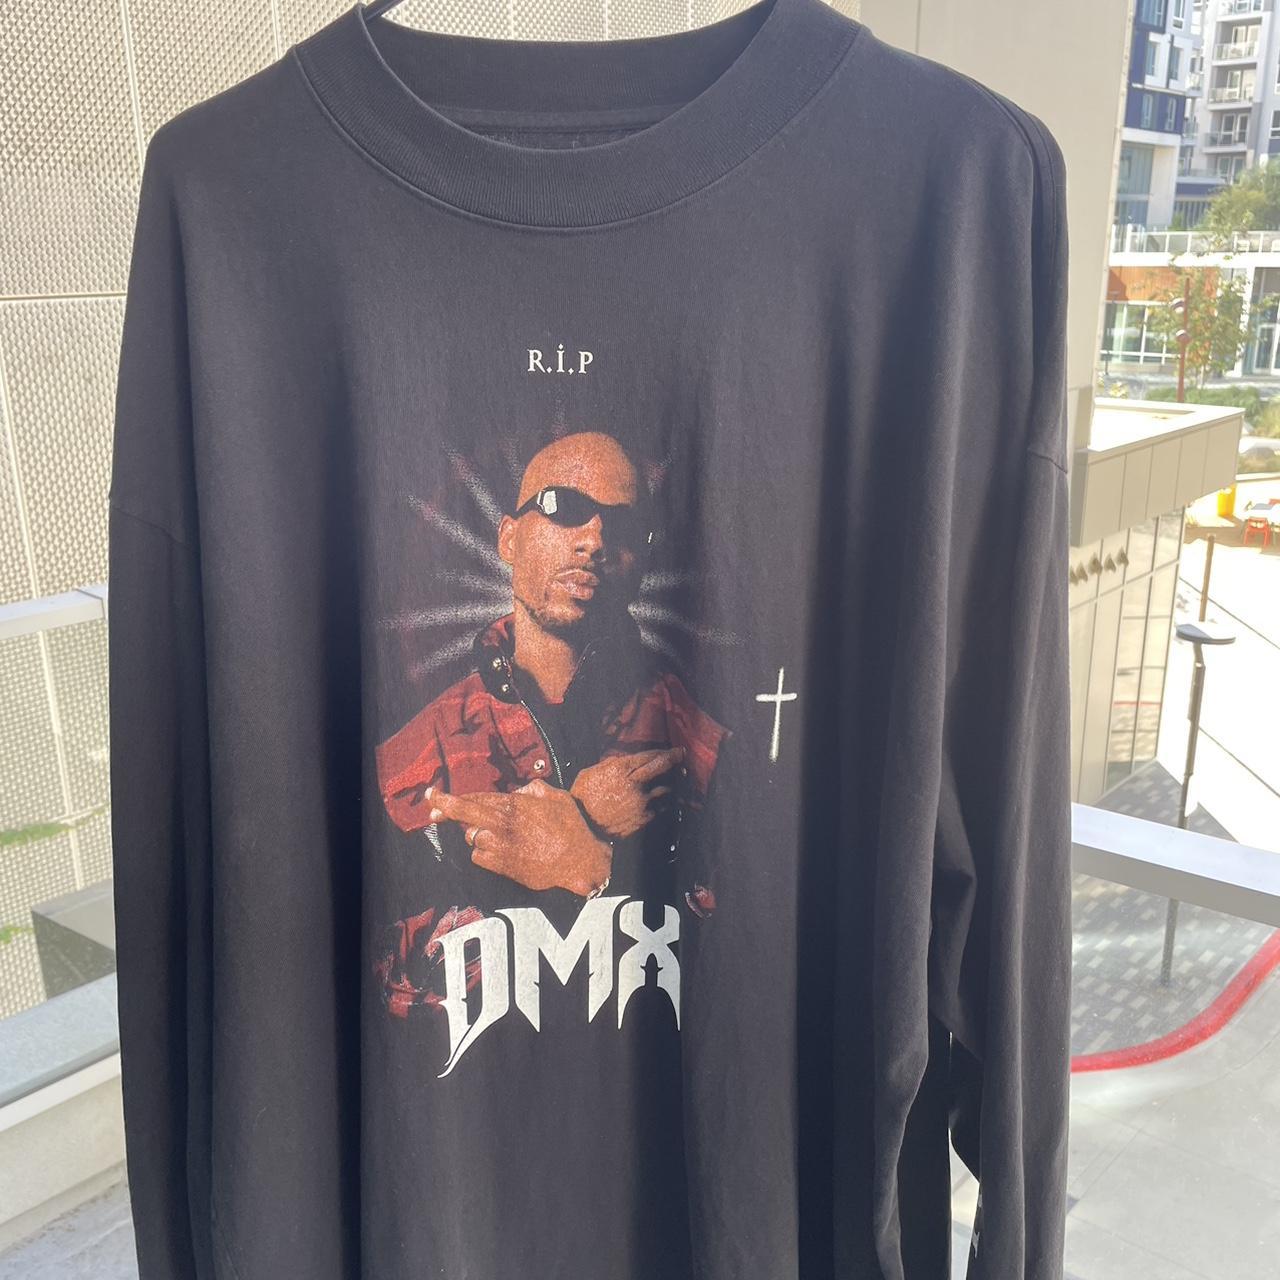 Yeezy Balenciaga DMX Tribute Shirts Reportedly Raise 1 Million for DMXs  Family UPDATE  Complex